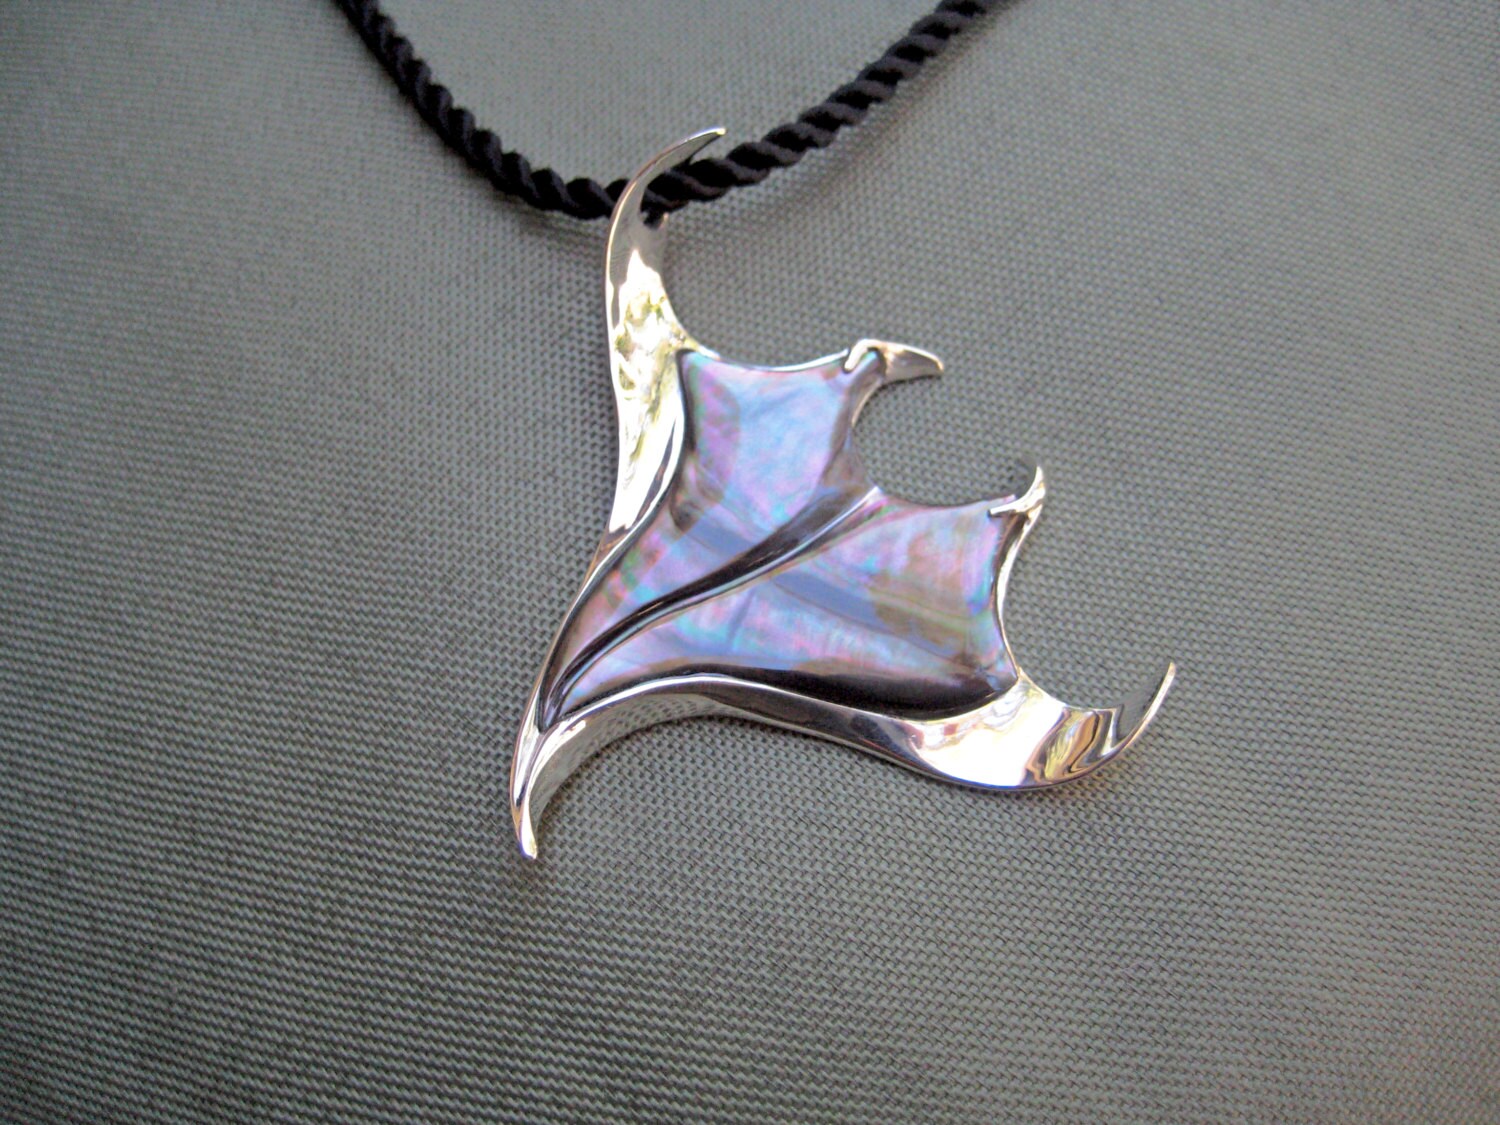 This Seawing Manta Ray pendant depicts the beauty